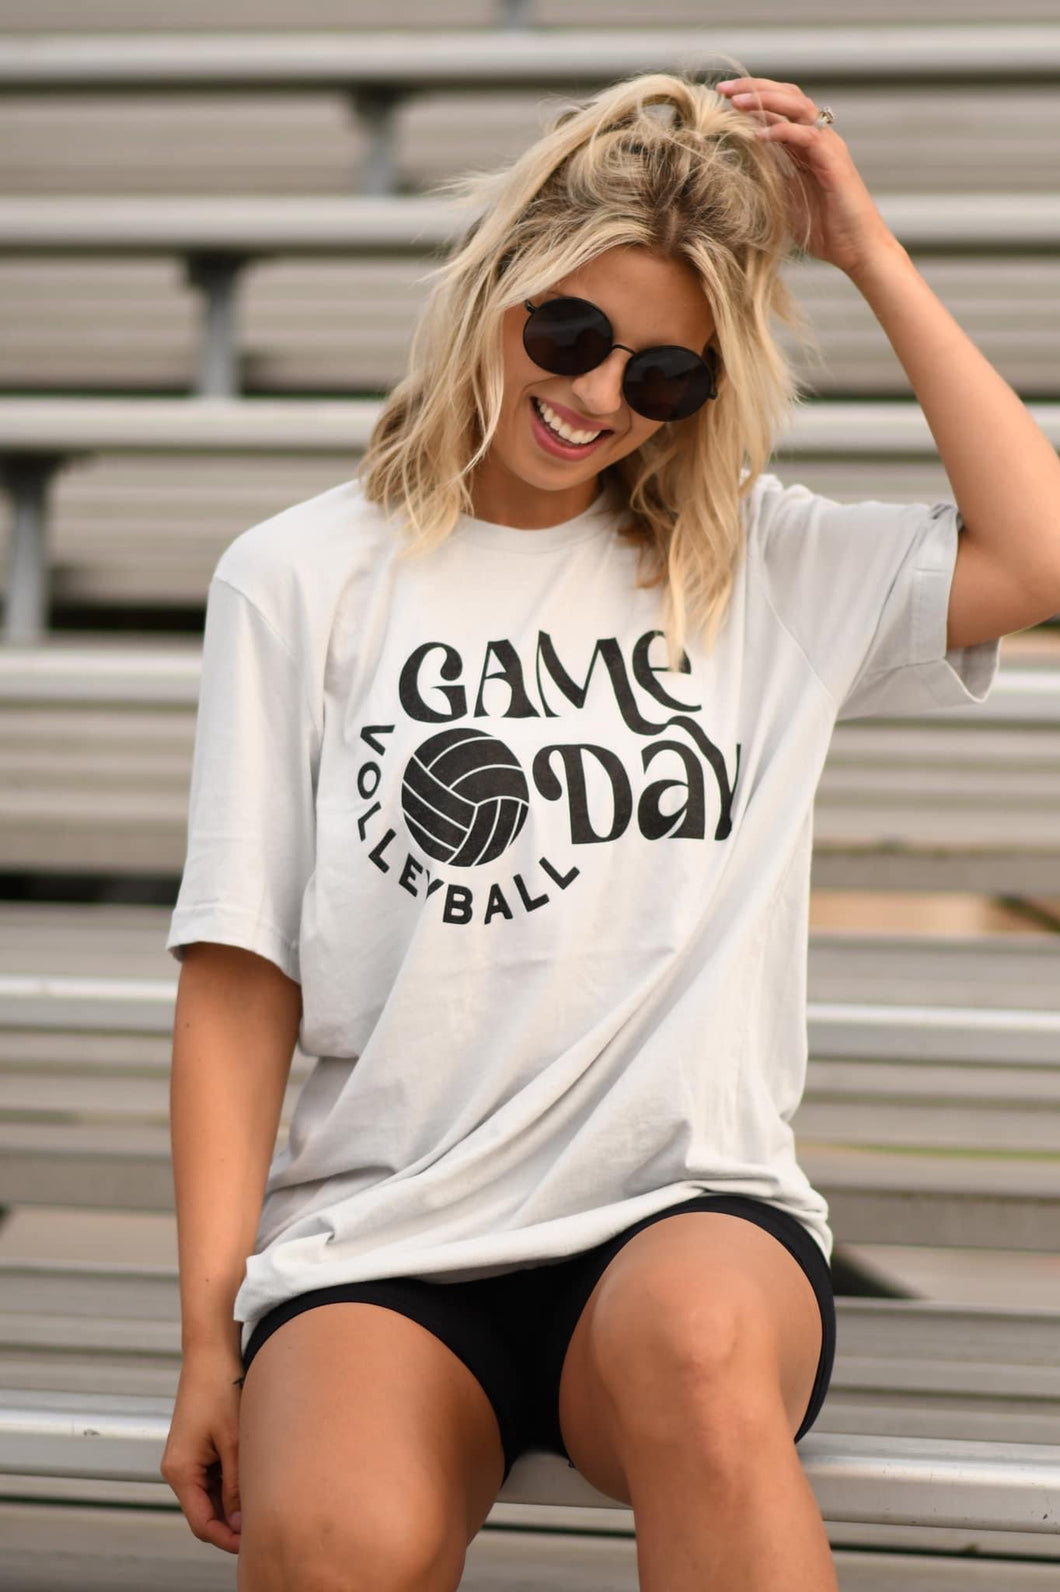 Volleyball tees